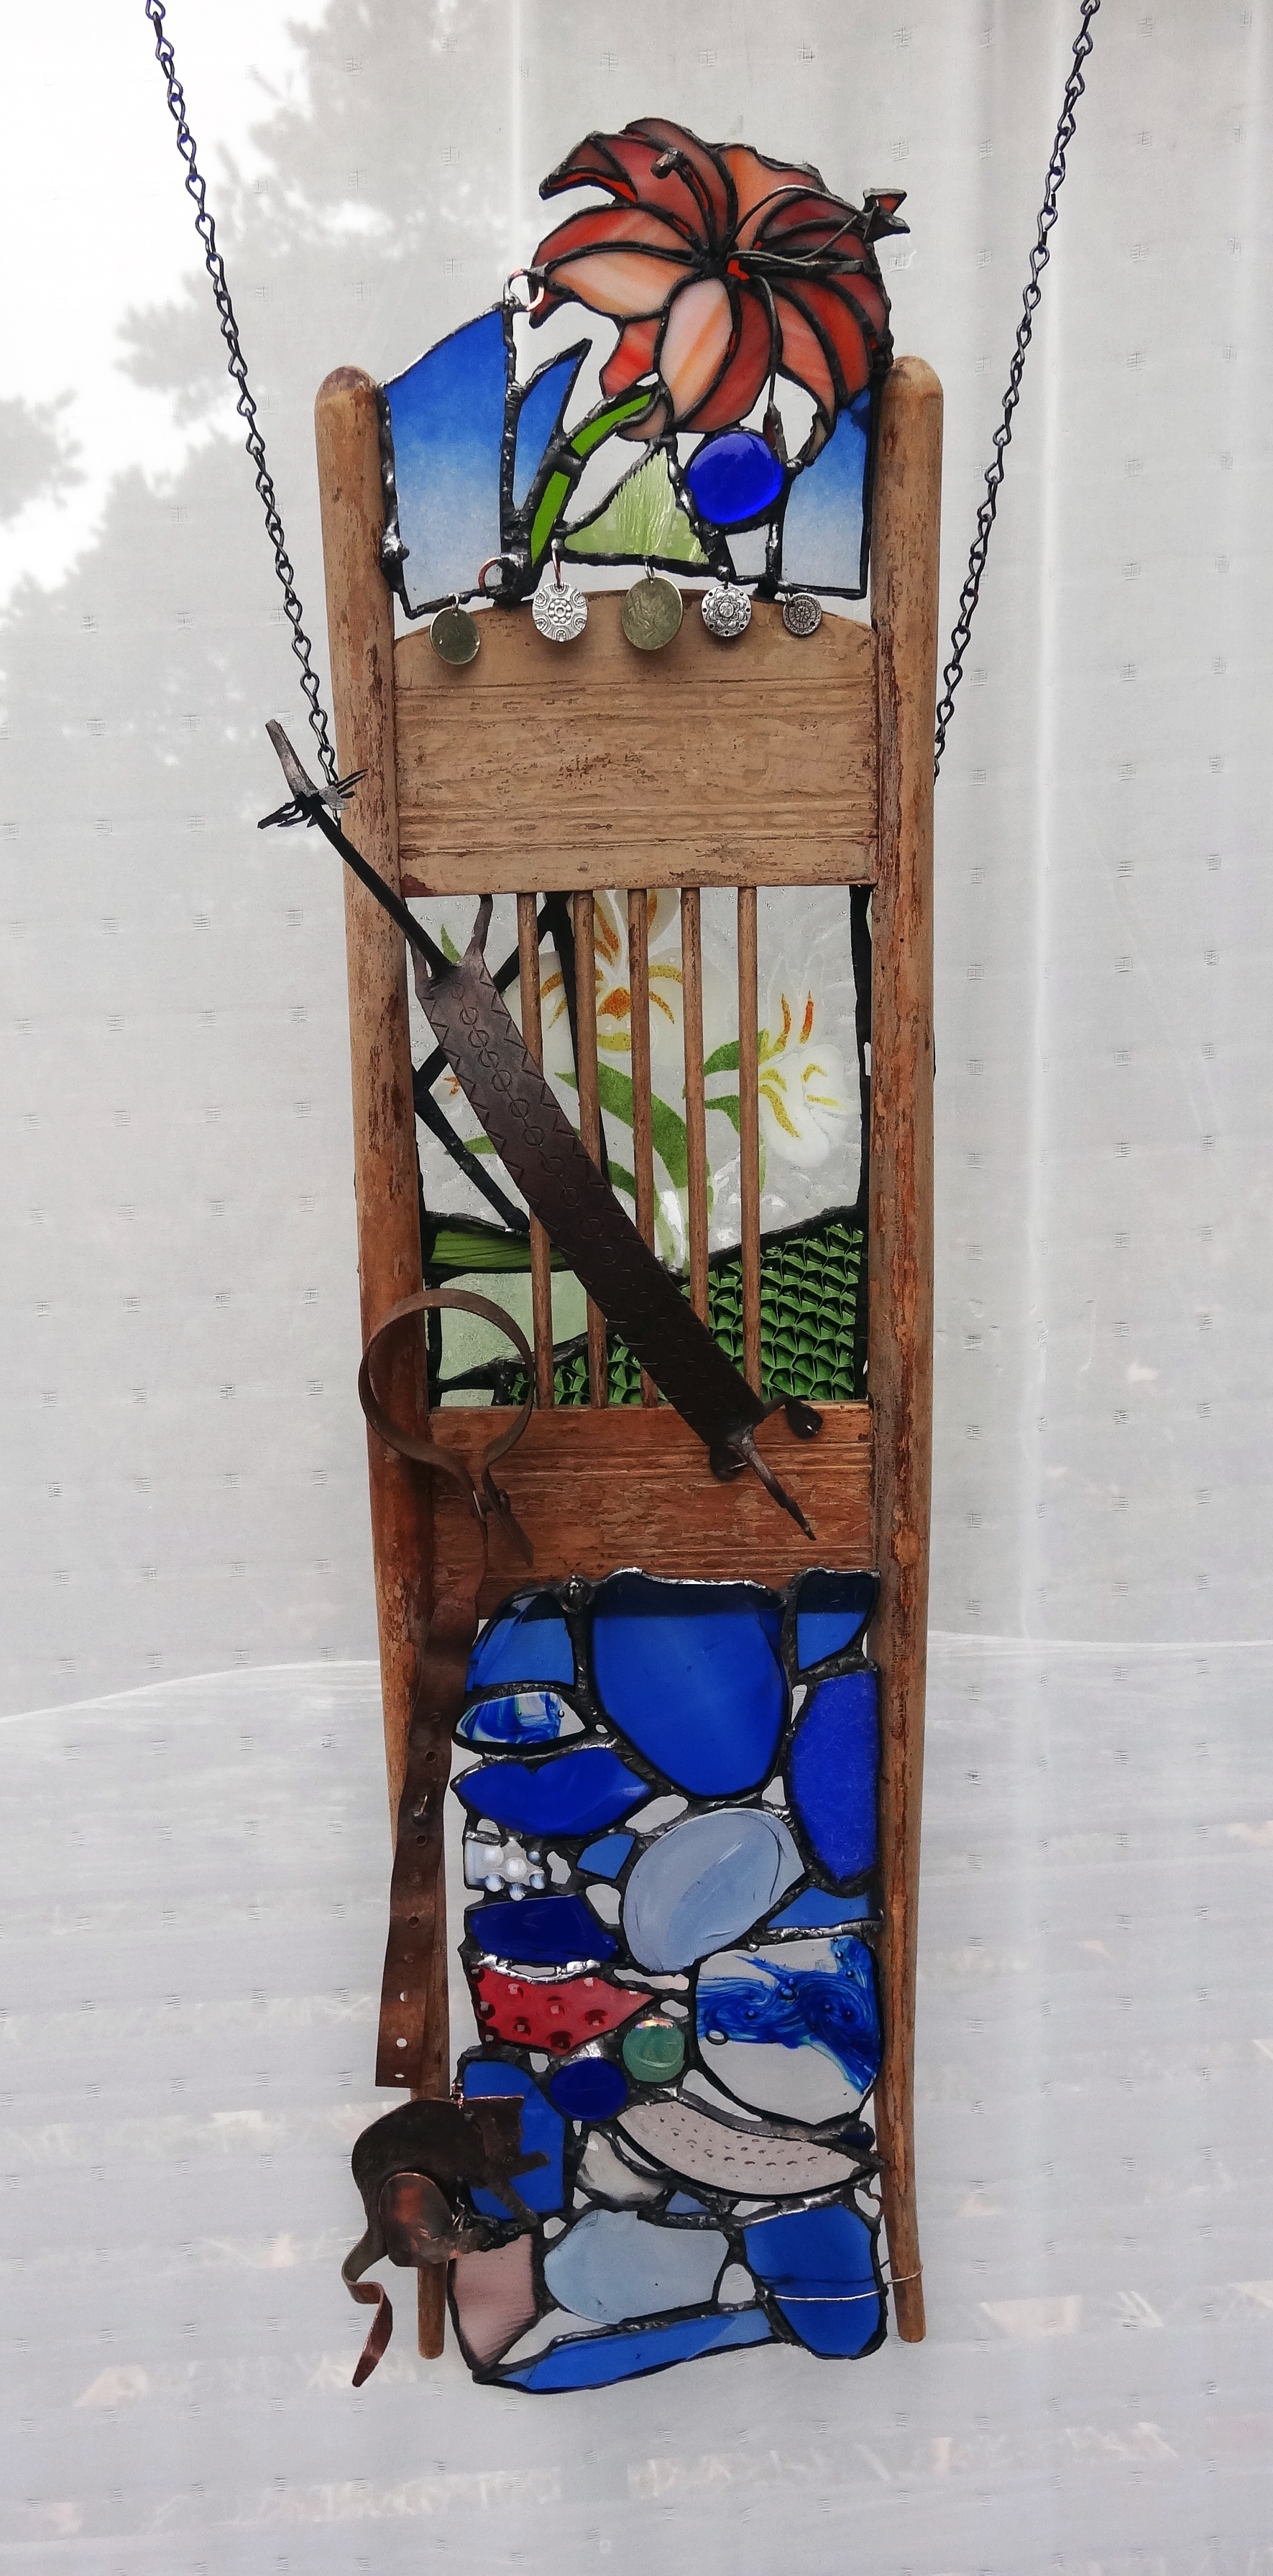 FREE FROM CAPTIVITY ~ 36"X10" Repurposed wood, glass and metals (SOLD)